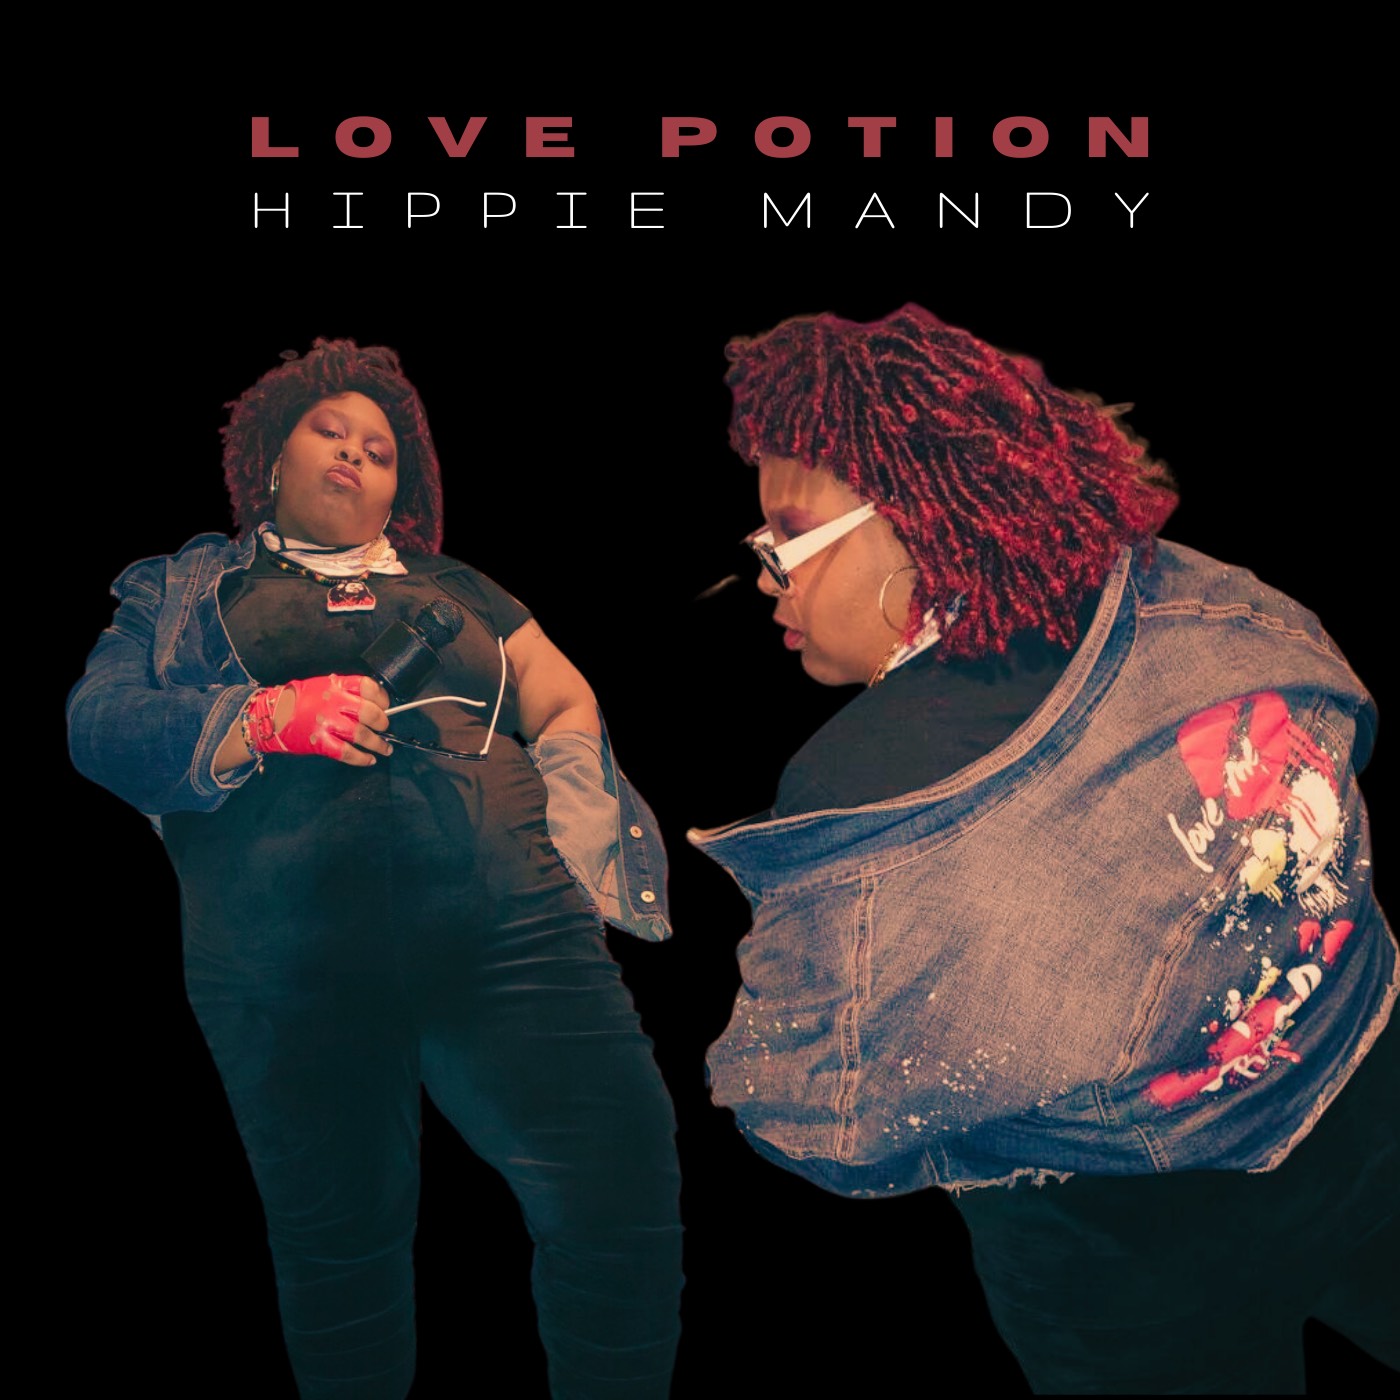 Hippie Mandy Teams with Digital Underground's Young Hump for "The Plan"